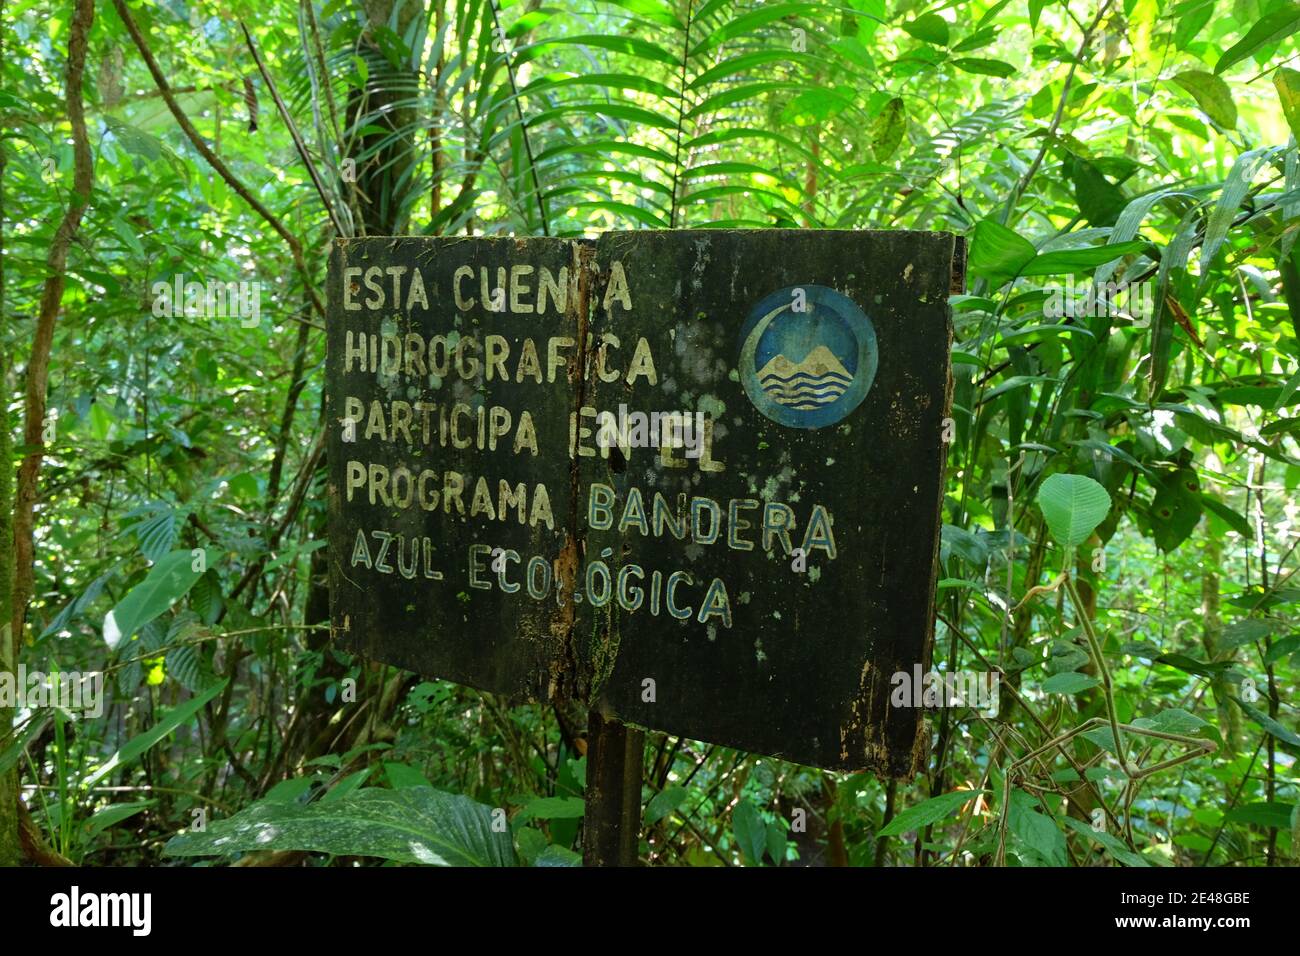 Costa Rican, sign showing that the water from the forest stream is used and captured in an eco-friendly manner. Stock Photo